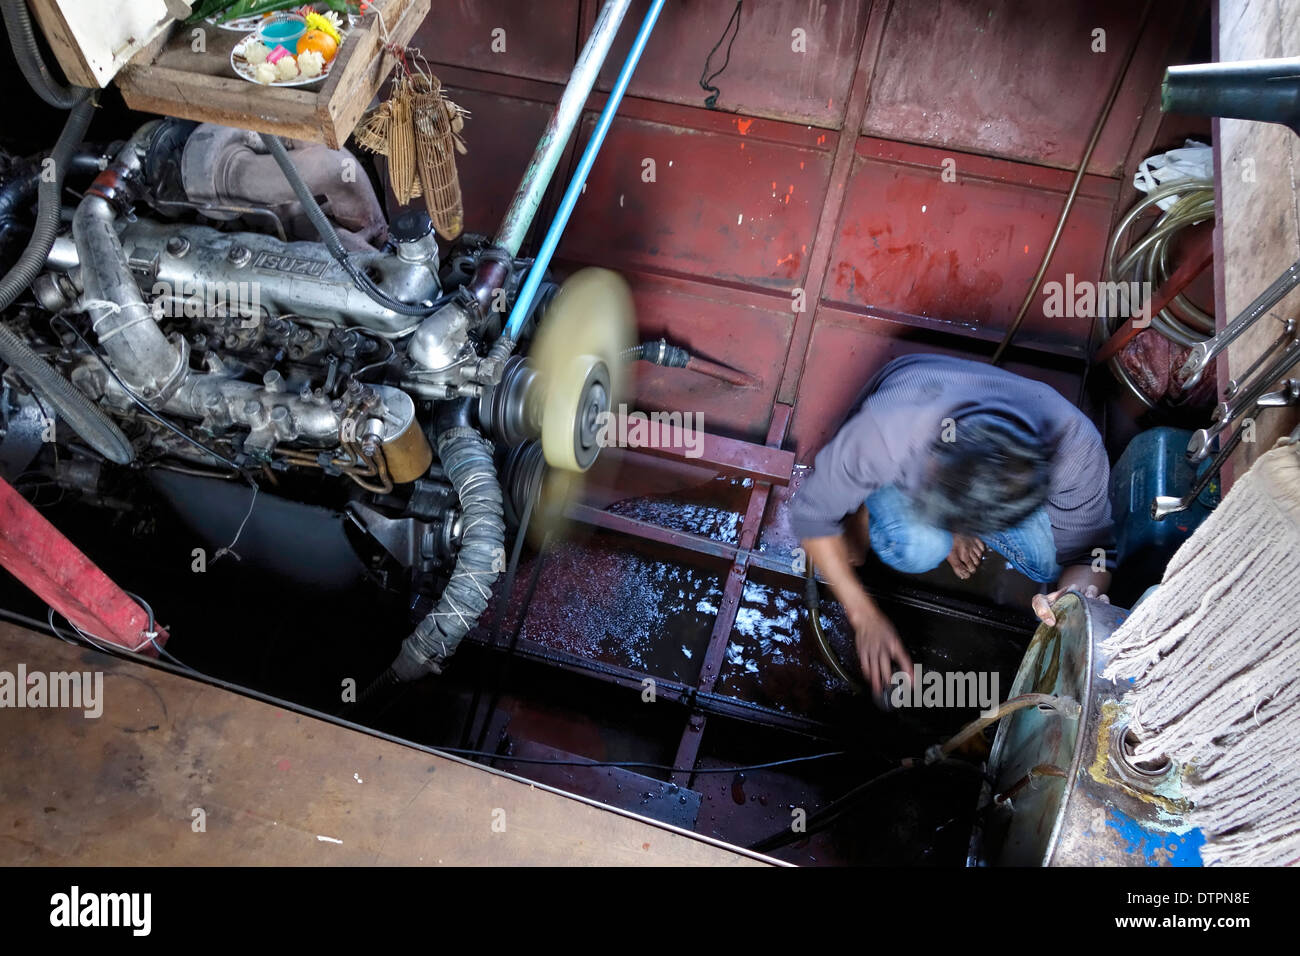 Crew member bailing water from the engine room of a 'slow boat' on the Mekong River in Laos. Stock Photo